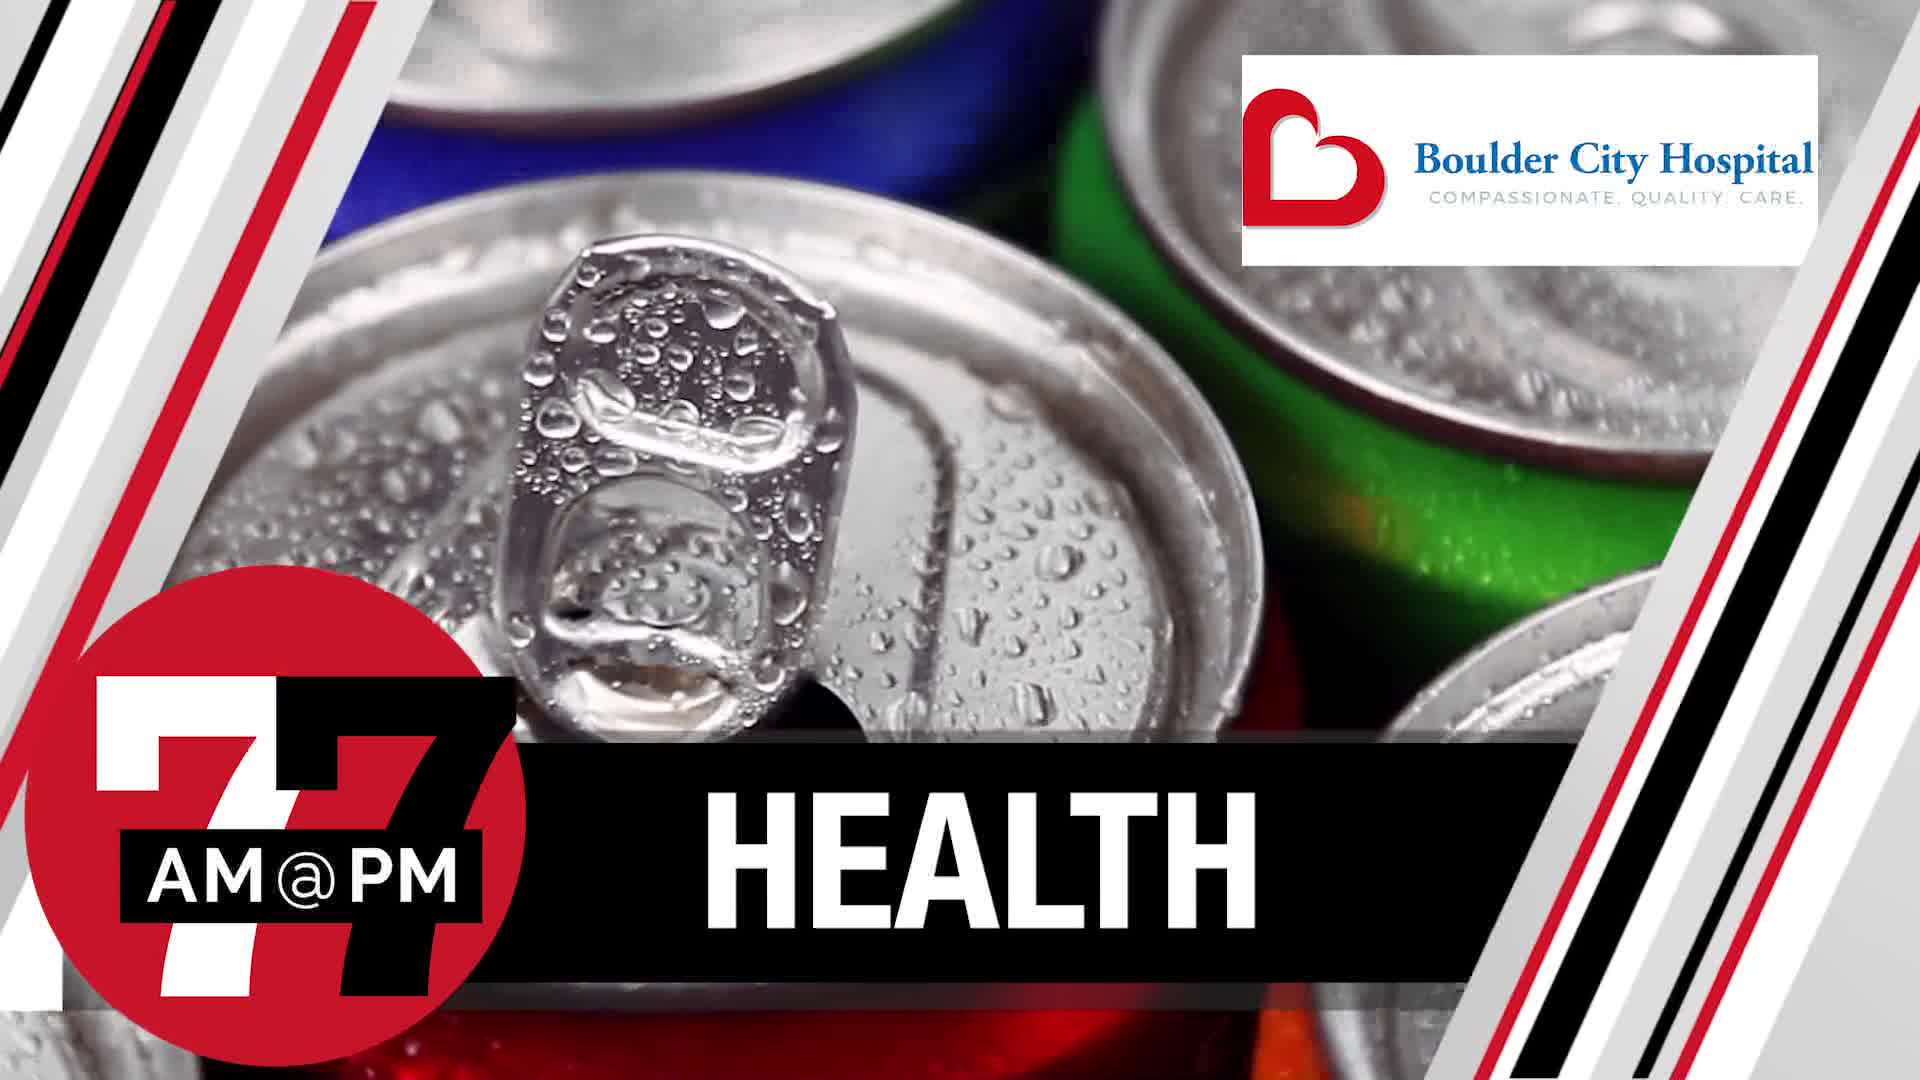 Campaign to Reduce Soda Consumption